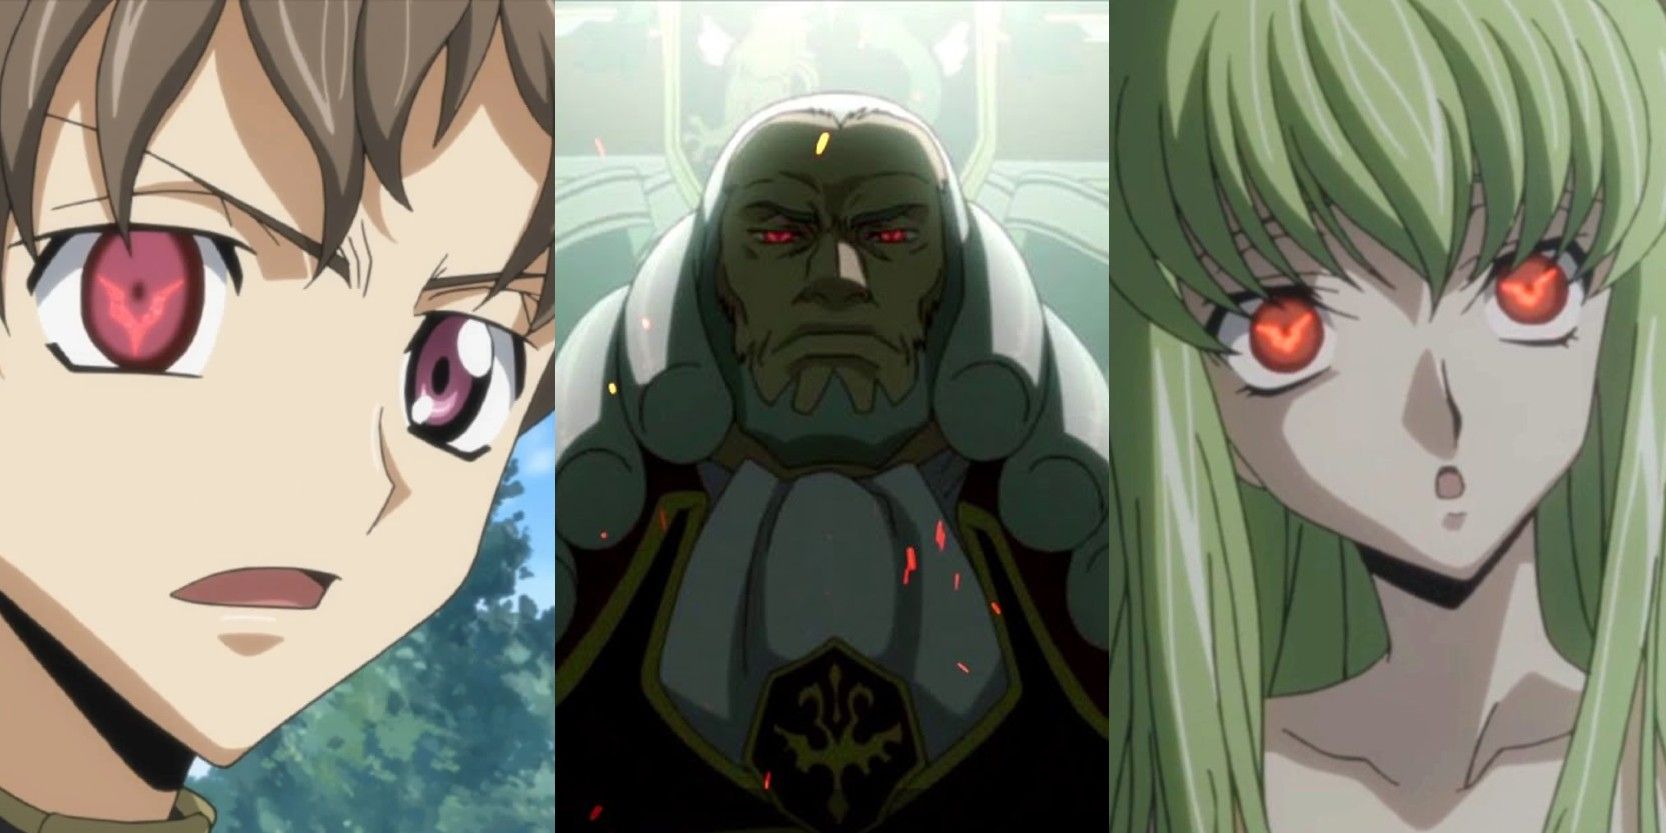 Rolo, Charles and CC were users of Geass in Code Geass